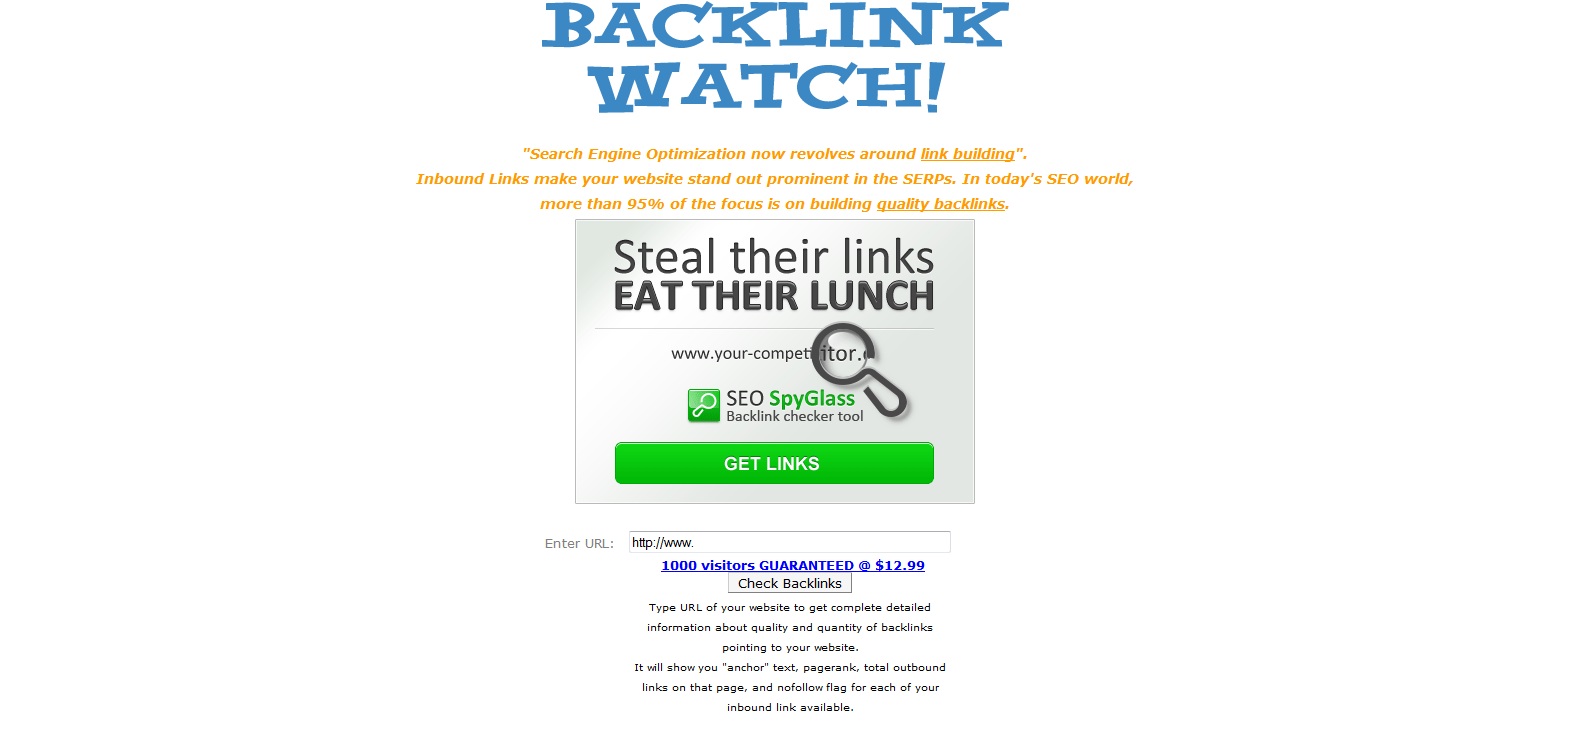 Backlink Watch Review - check backlinks for free